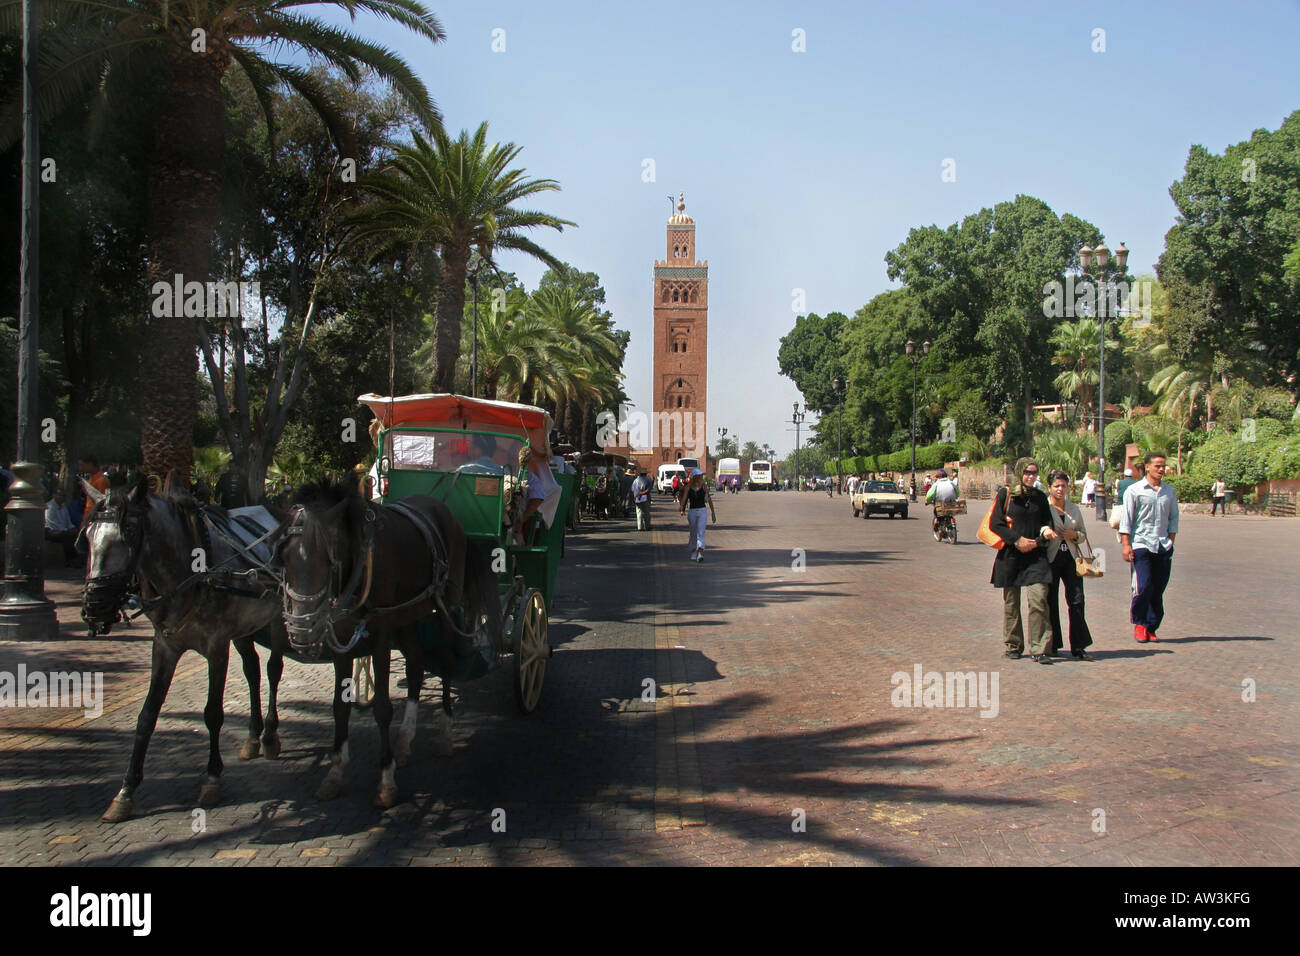 Koutoubia Mosque view from Djemaa el Fna square Marrakesh Morocco Stock Photo